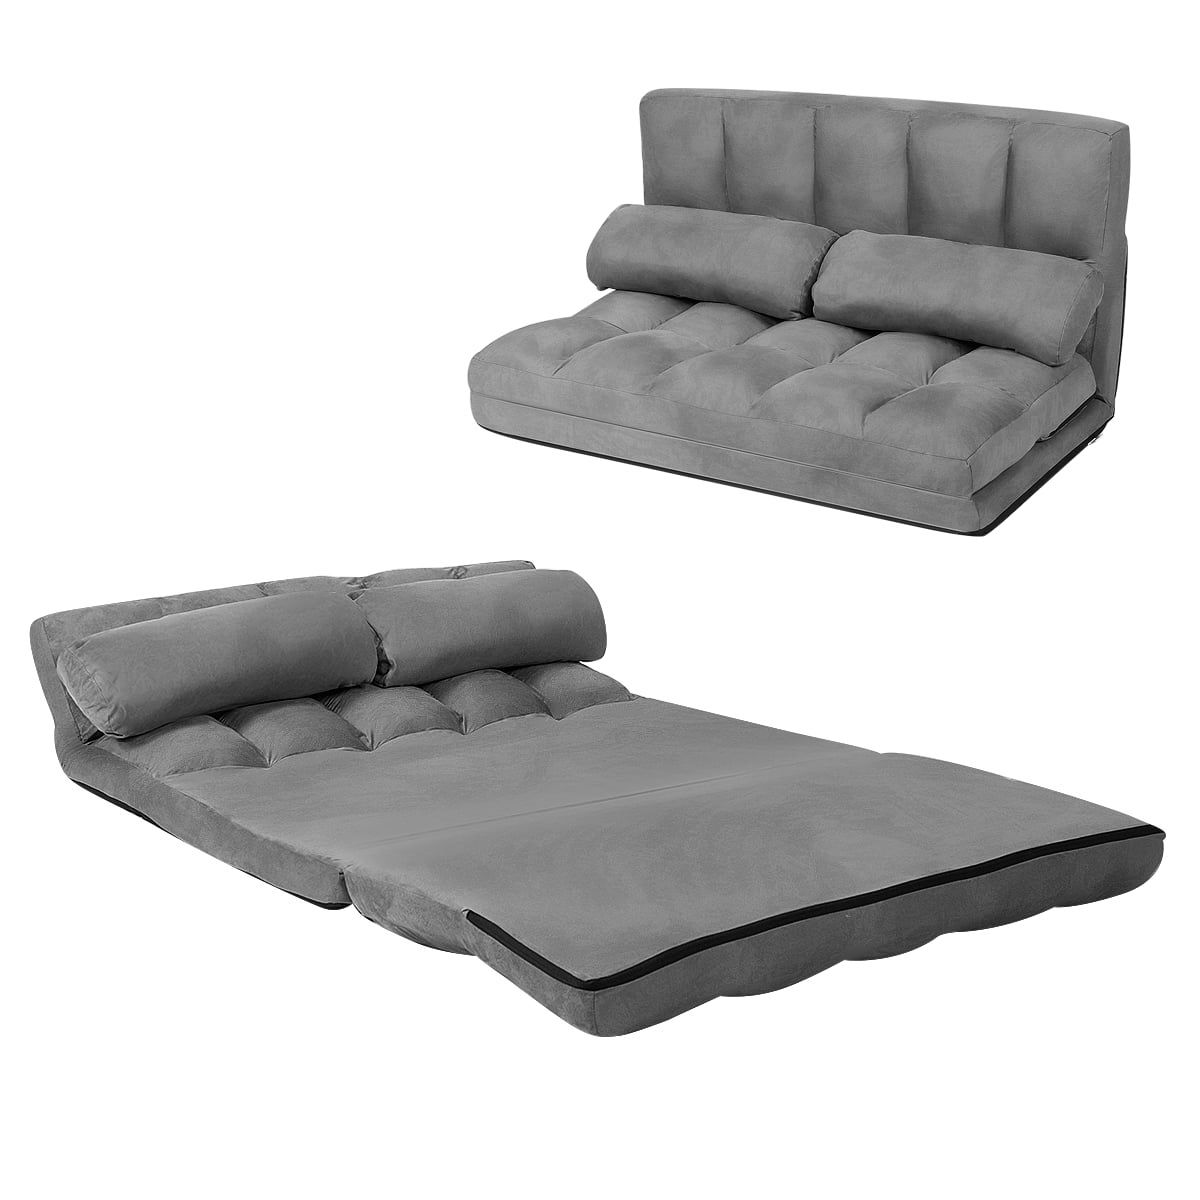 2017 2 In 1 Foldable Sofas With Regard To Topbuy Adjustable Floor Sofa Foldable Lazy Sofa Bed With 2 Pillows Grey (View 15 of 15)